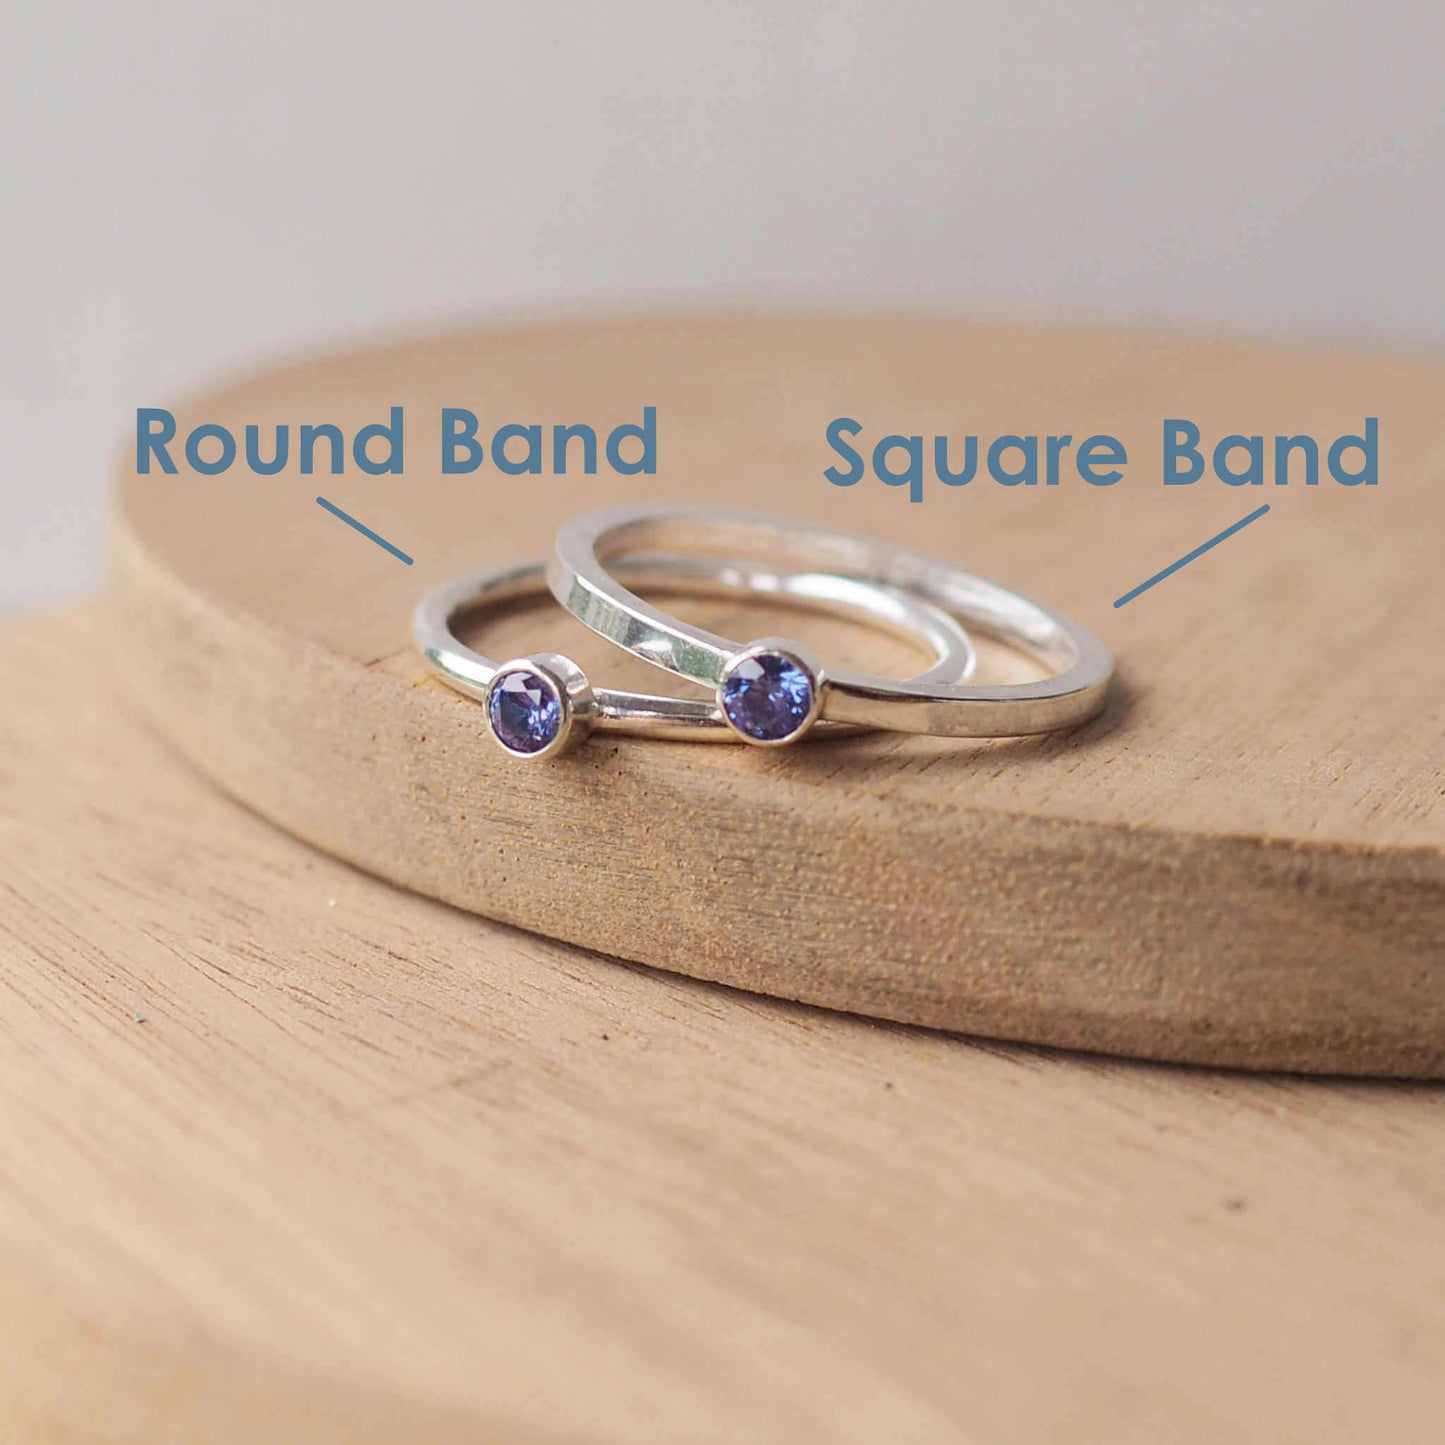 Two rings showing the square and round band styles with 3mm tanzanite cubic zirconia gemstones. The rings are made from Sterling Silver and a round violet cubic zirconia measuring 3mm in size. Handmade by maram jewellery in Scotland